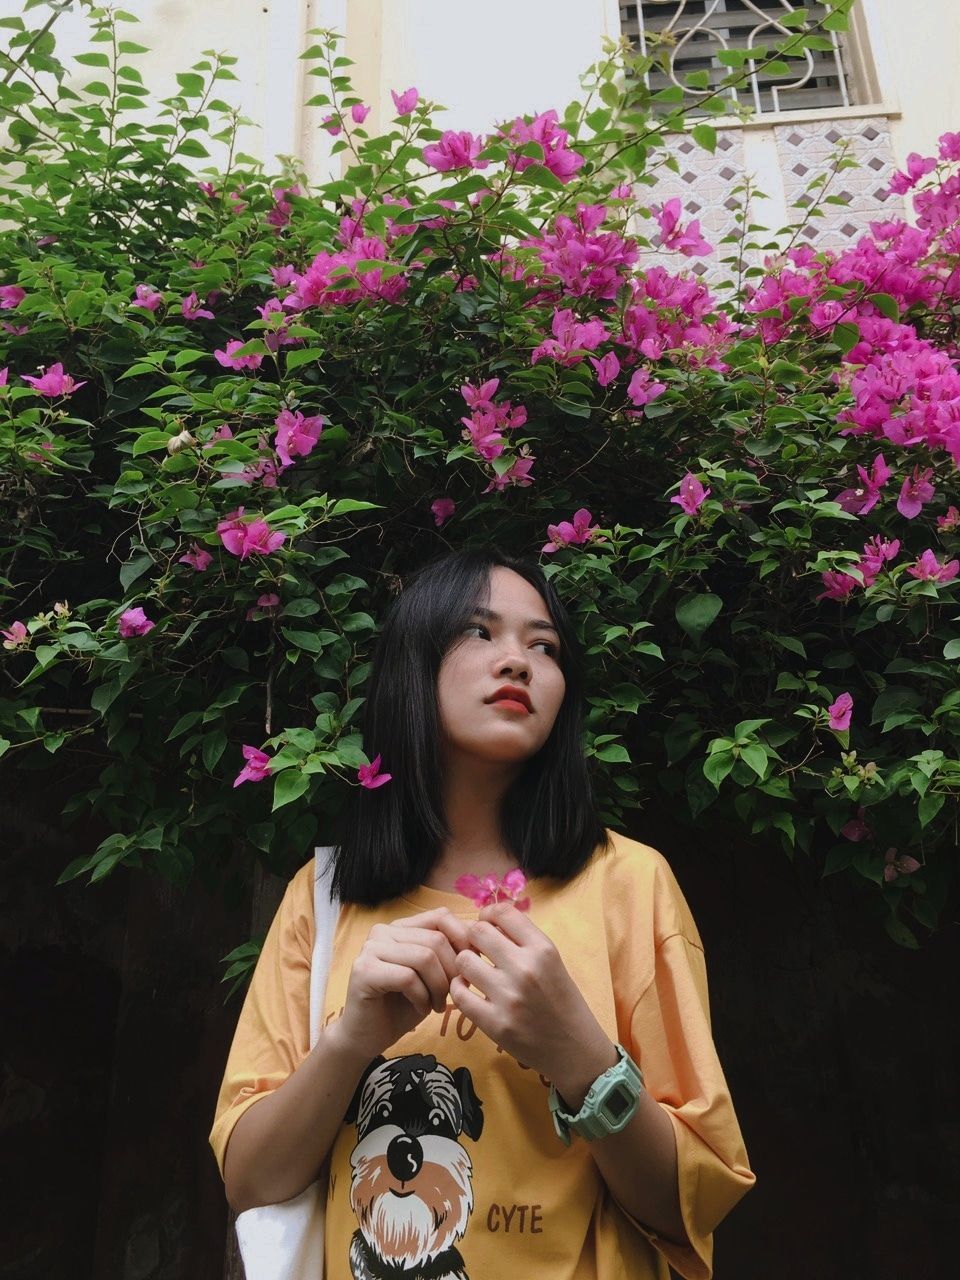 flower, flowering plant, plant, one person, leisure activity, real people, lifestyles, front view, waist up, holding, freshness, fragility, young adult, pink color, casual clothing, young women, women, vulnerability, hair, hairstyle, beautiful woman, flower head, outdoors, teenager